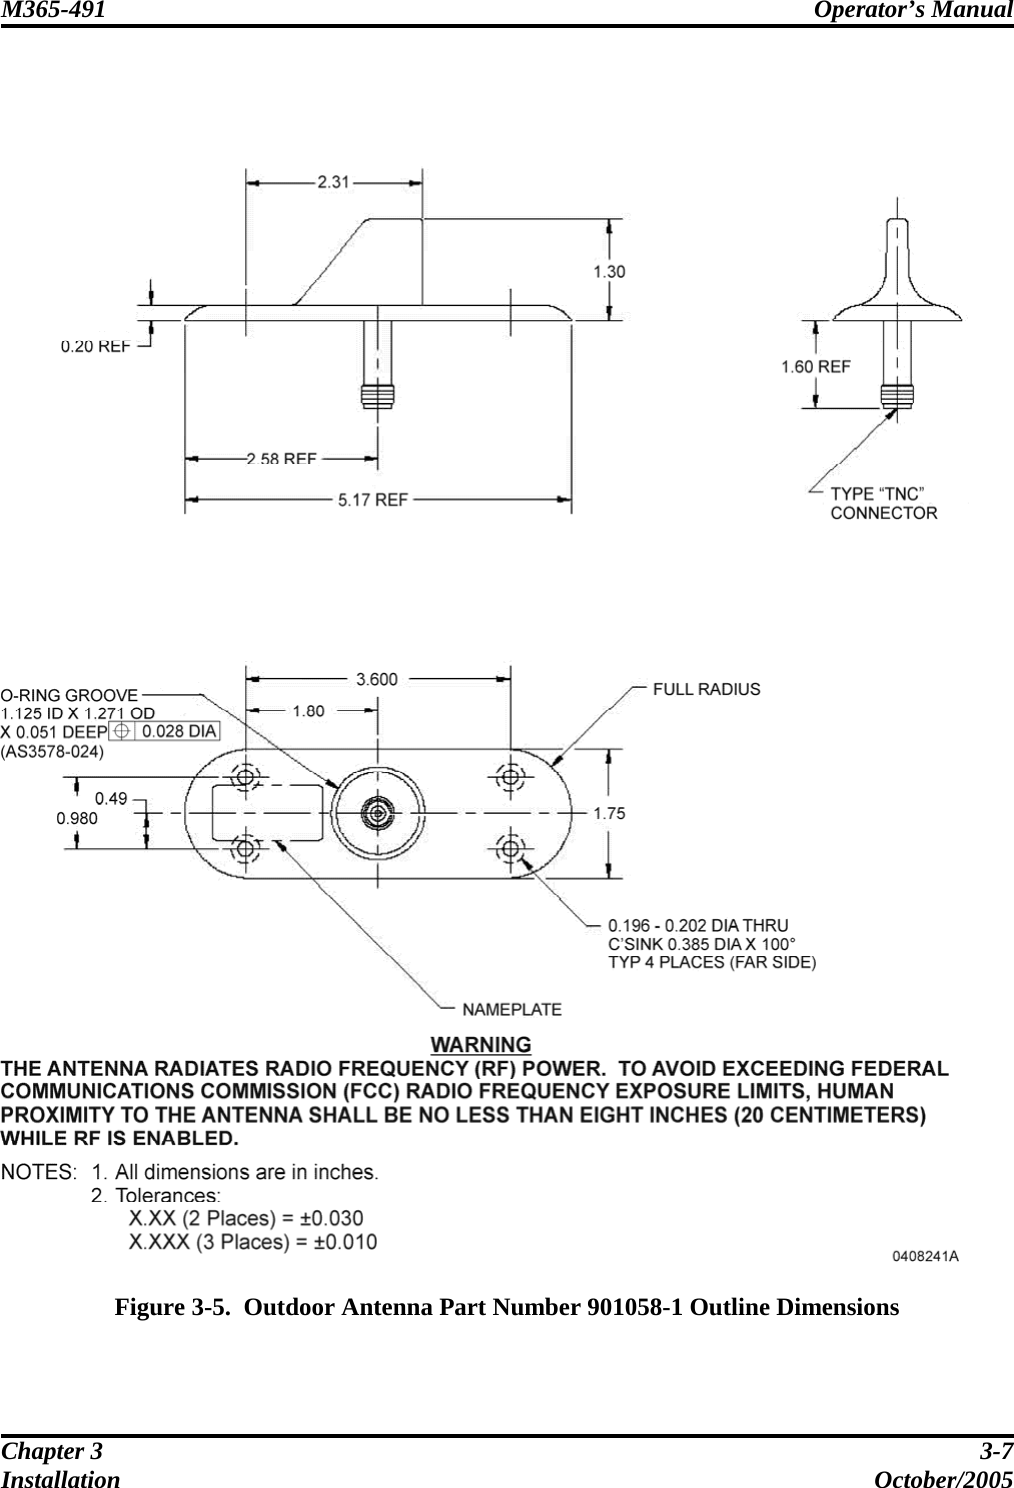 M365-491 Operator’s Manual   Chapter 3  3-7 Installation October/2005      Figure 3-5.  Outdoor Antenna Part Number 901058-1 Outline Dimensions 